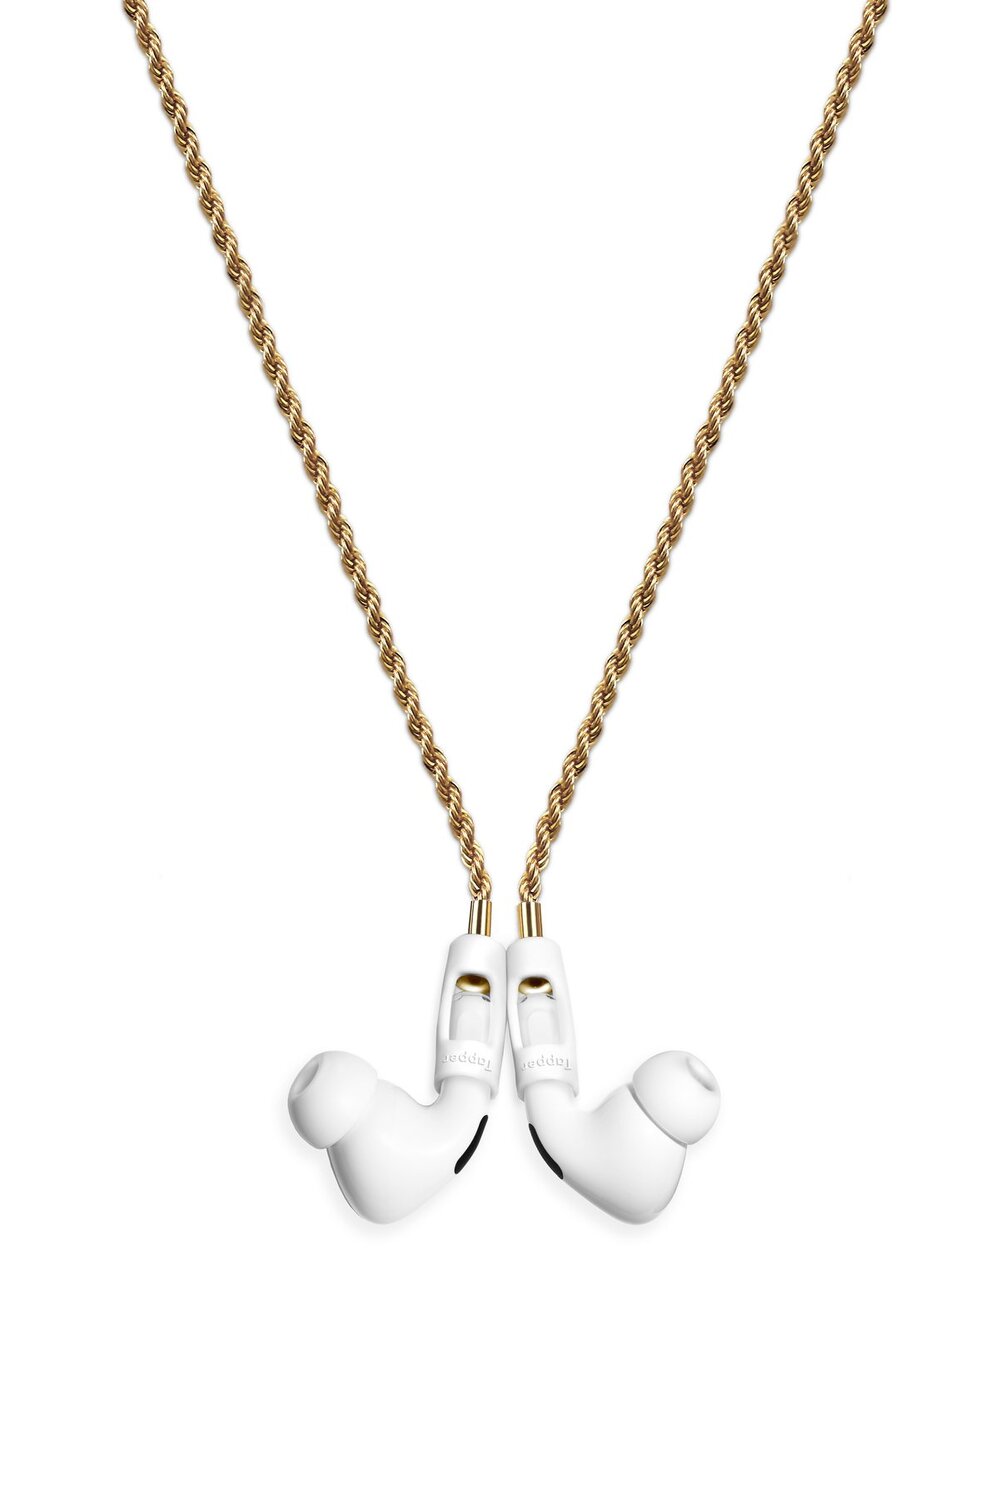 Tapper_AirPod_Pro_Strap_necklace_Gold_Rope_Chain_1800x1800.jpg